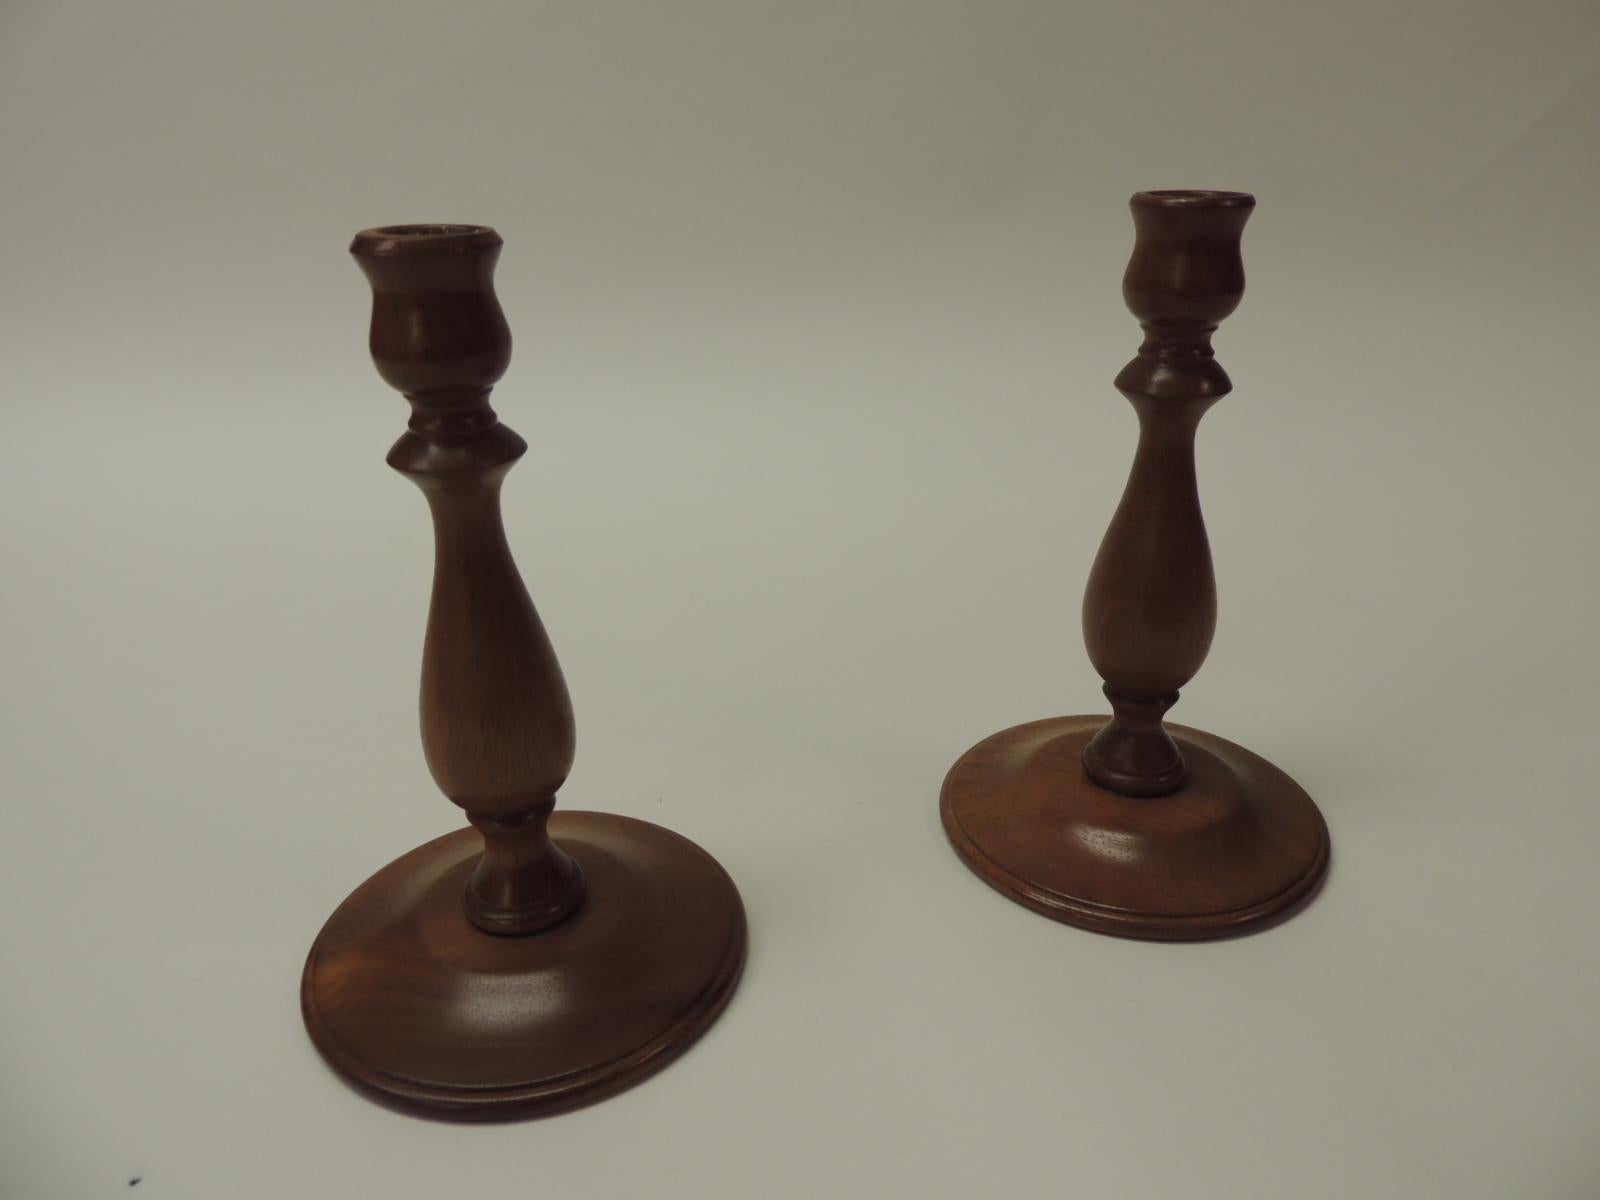 Hand-Crafted Pair of Mid-Century Modern Round Mahogany Candle Holders